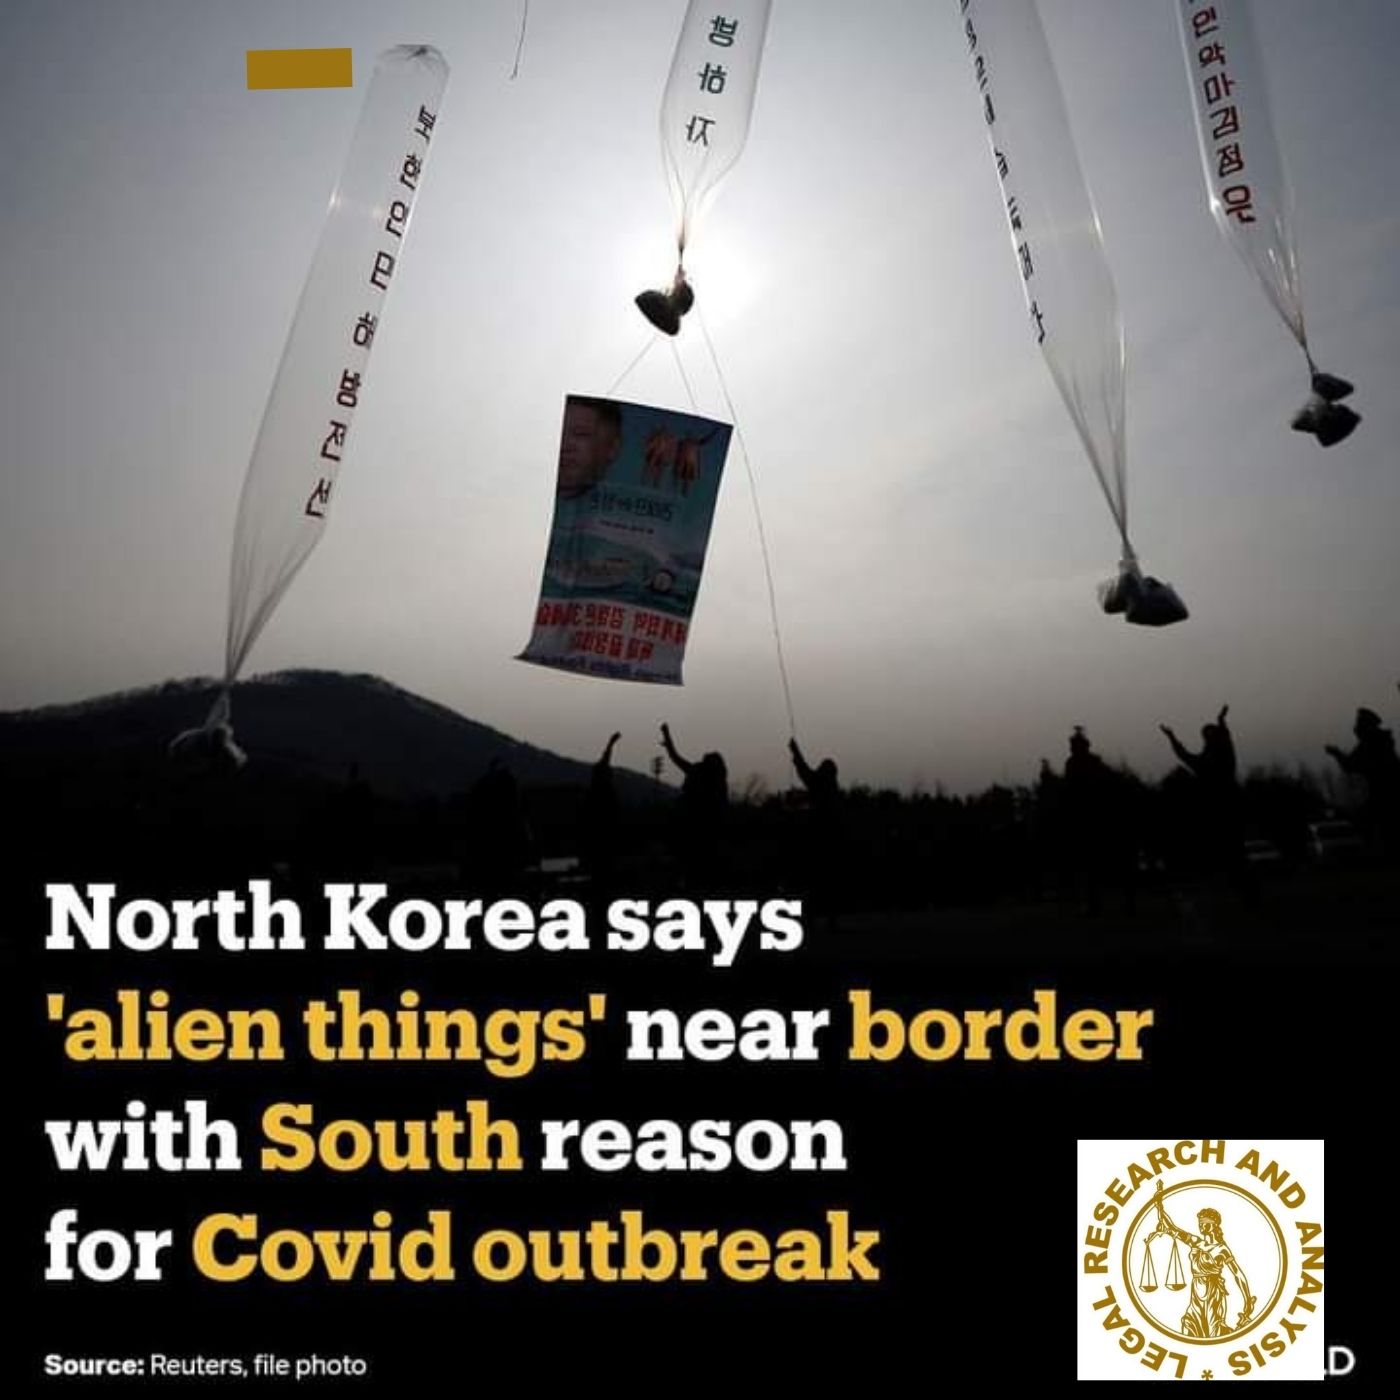 North Korea says ‘Alien things’ near the border with the South are the reason for the Covid outbreak.